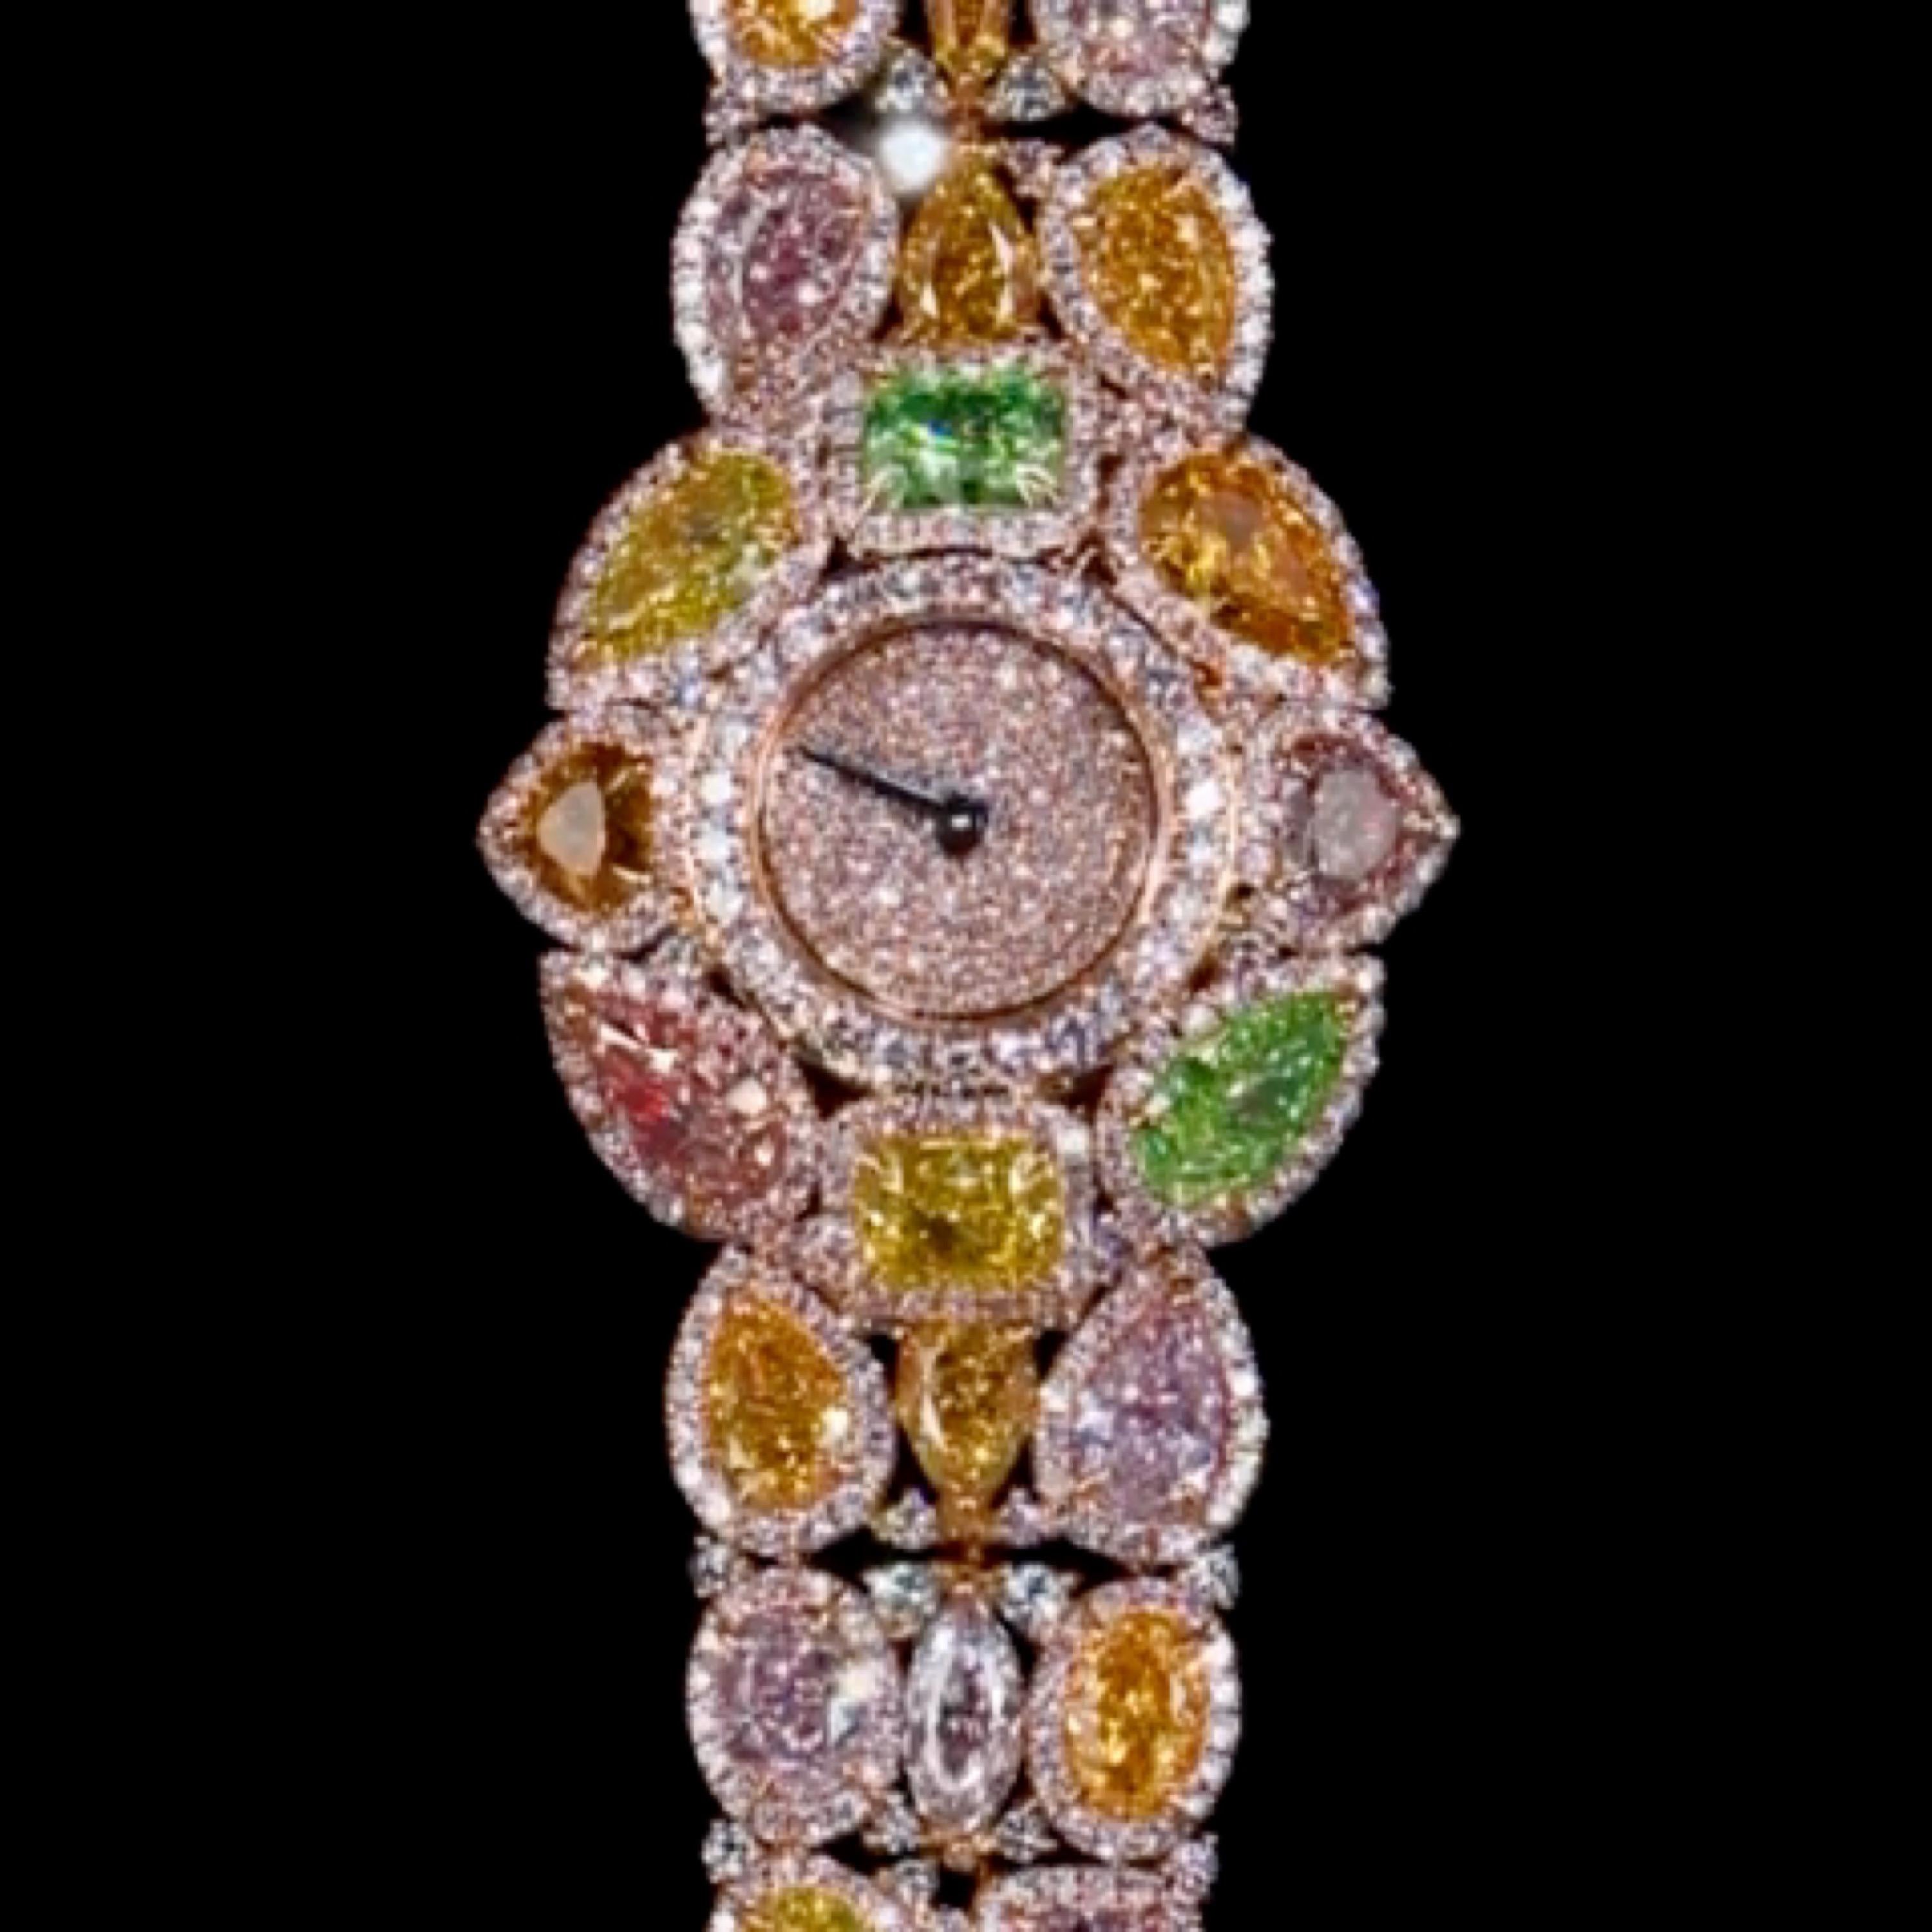 From the Museum Vault At Emilio Jewelry, a well known and trusted dealer located on New York's iconic Fifth Avenue. 

With many years of accumulated Natural Fancy Colored diamonds of all shades, we certified each and every one of them with the Gia